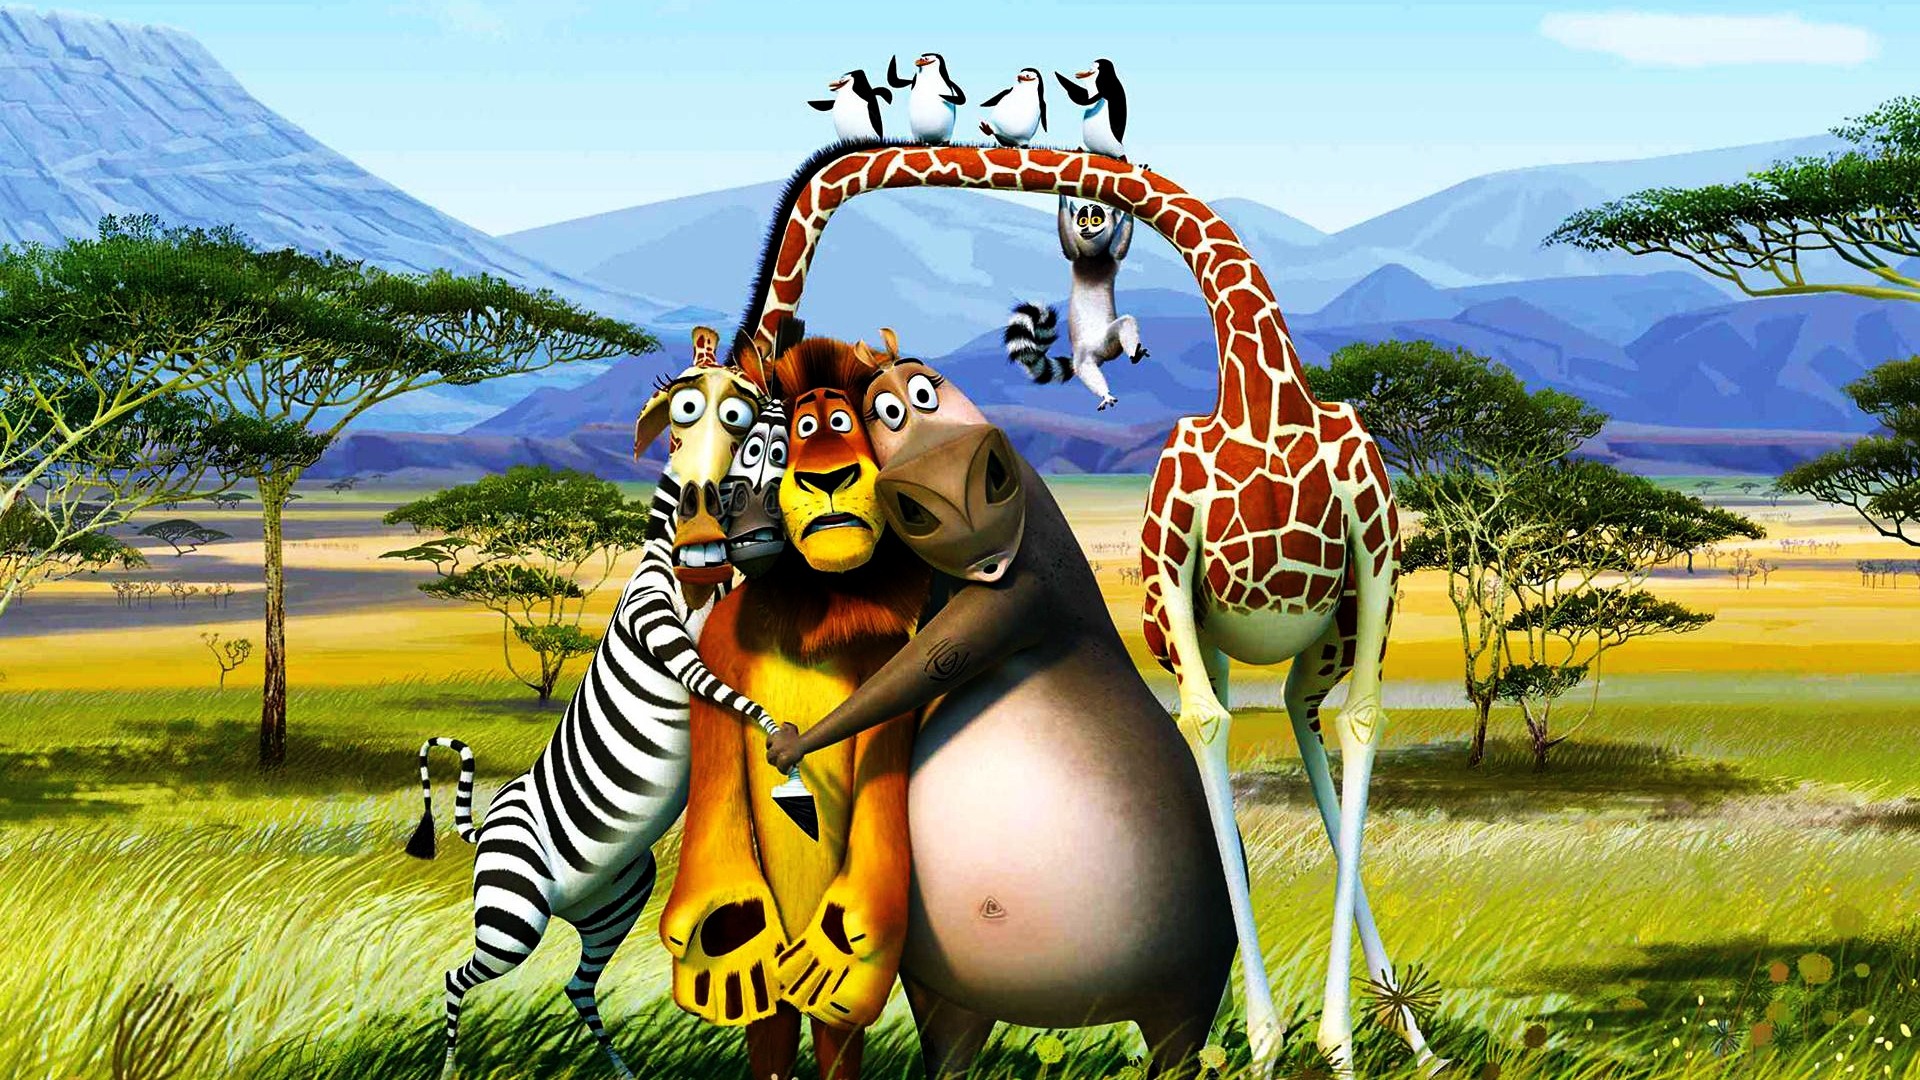 Madagascar 3: Europe's Most Wanted HD wallpapers #2 - 1920x1080